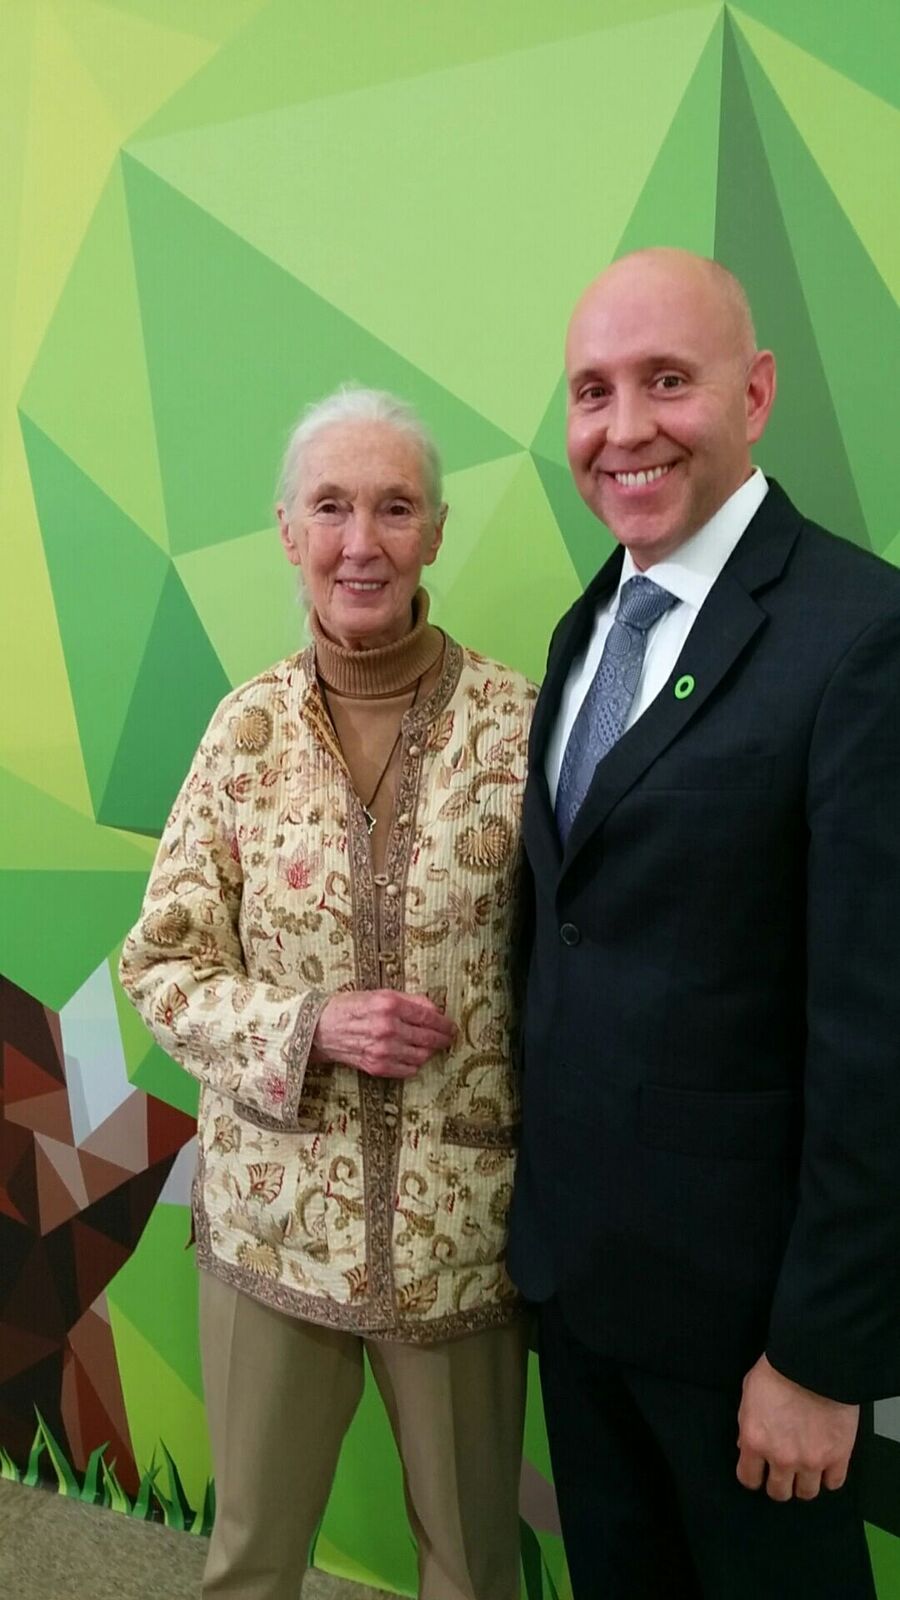 Darcy Belanger with Dr. Jane Goodall